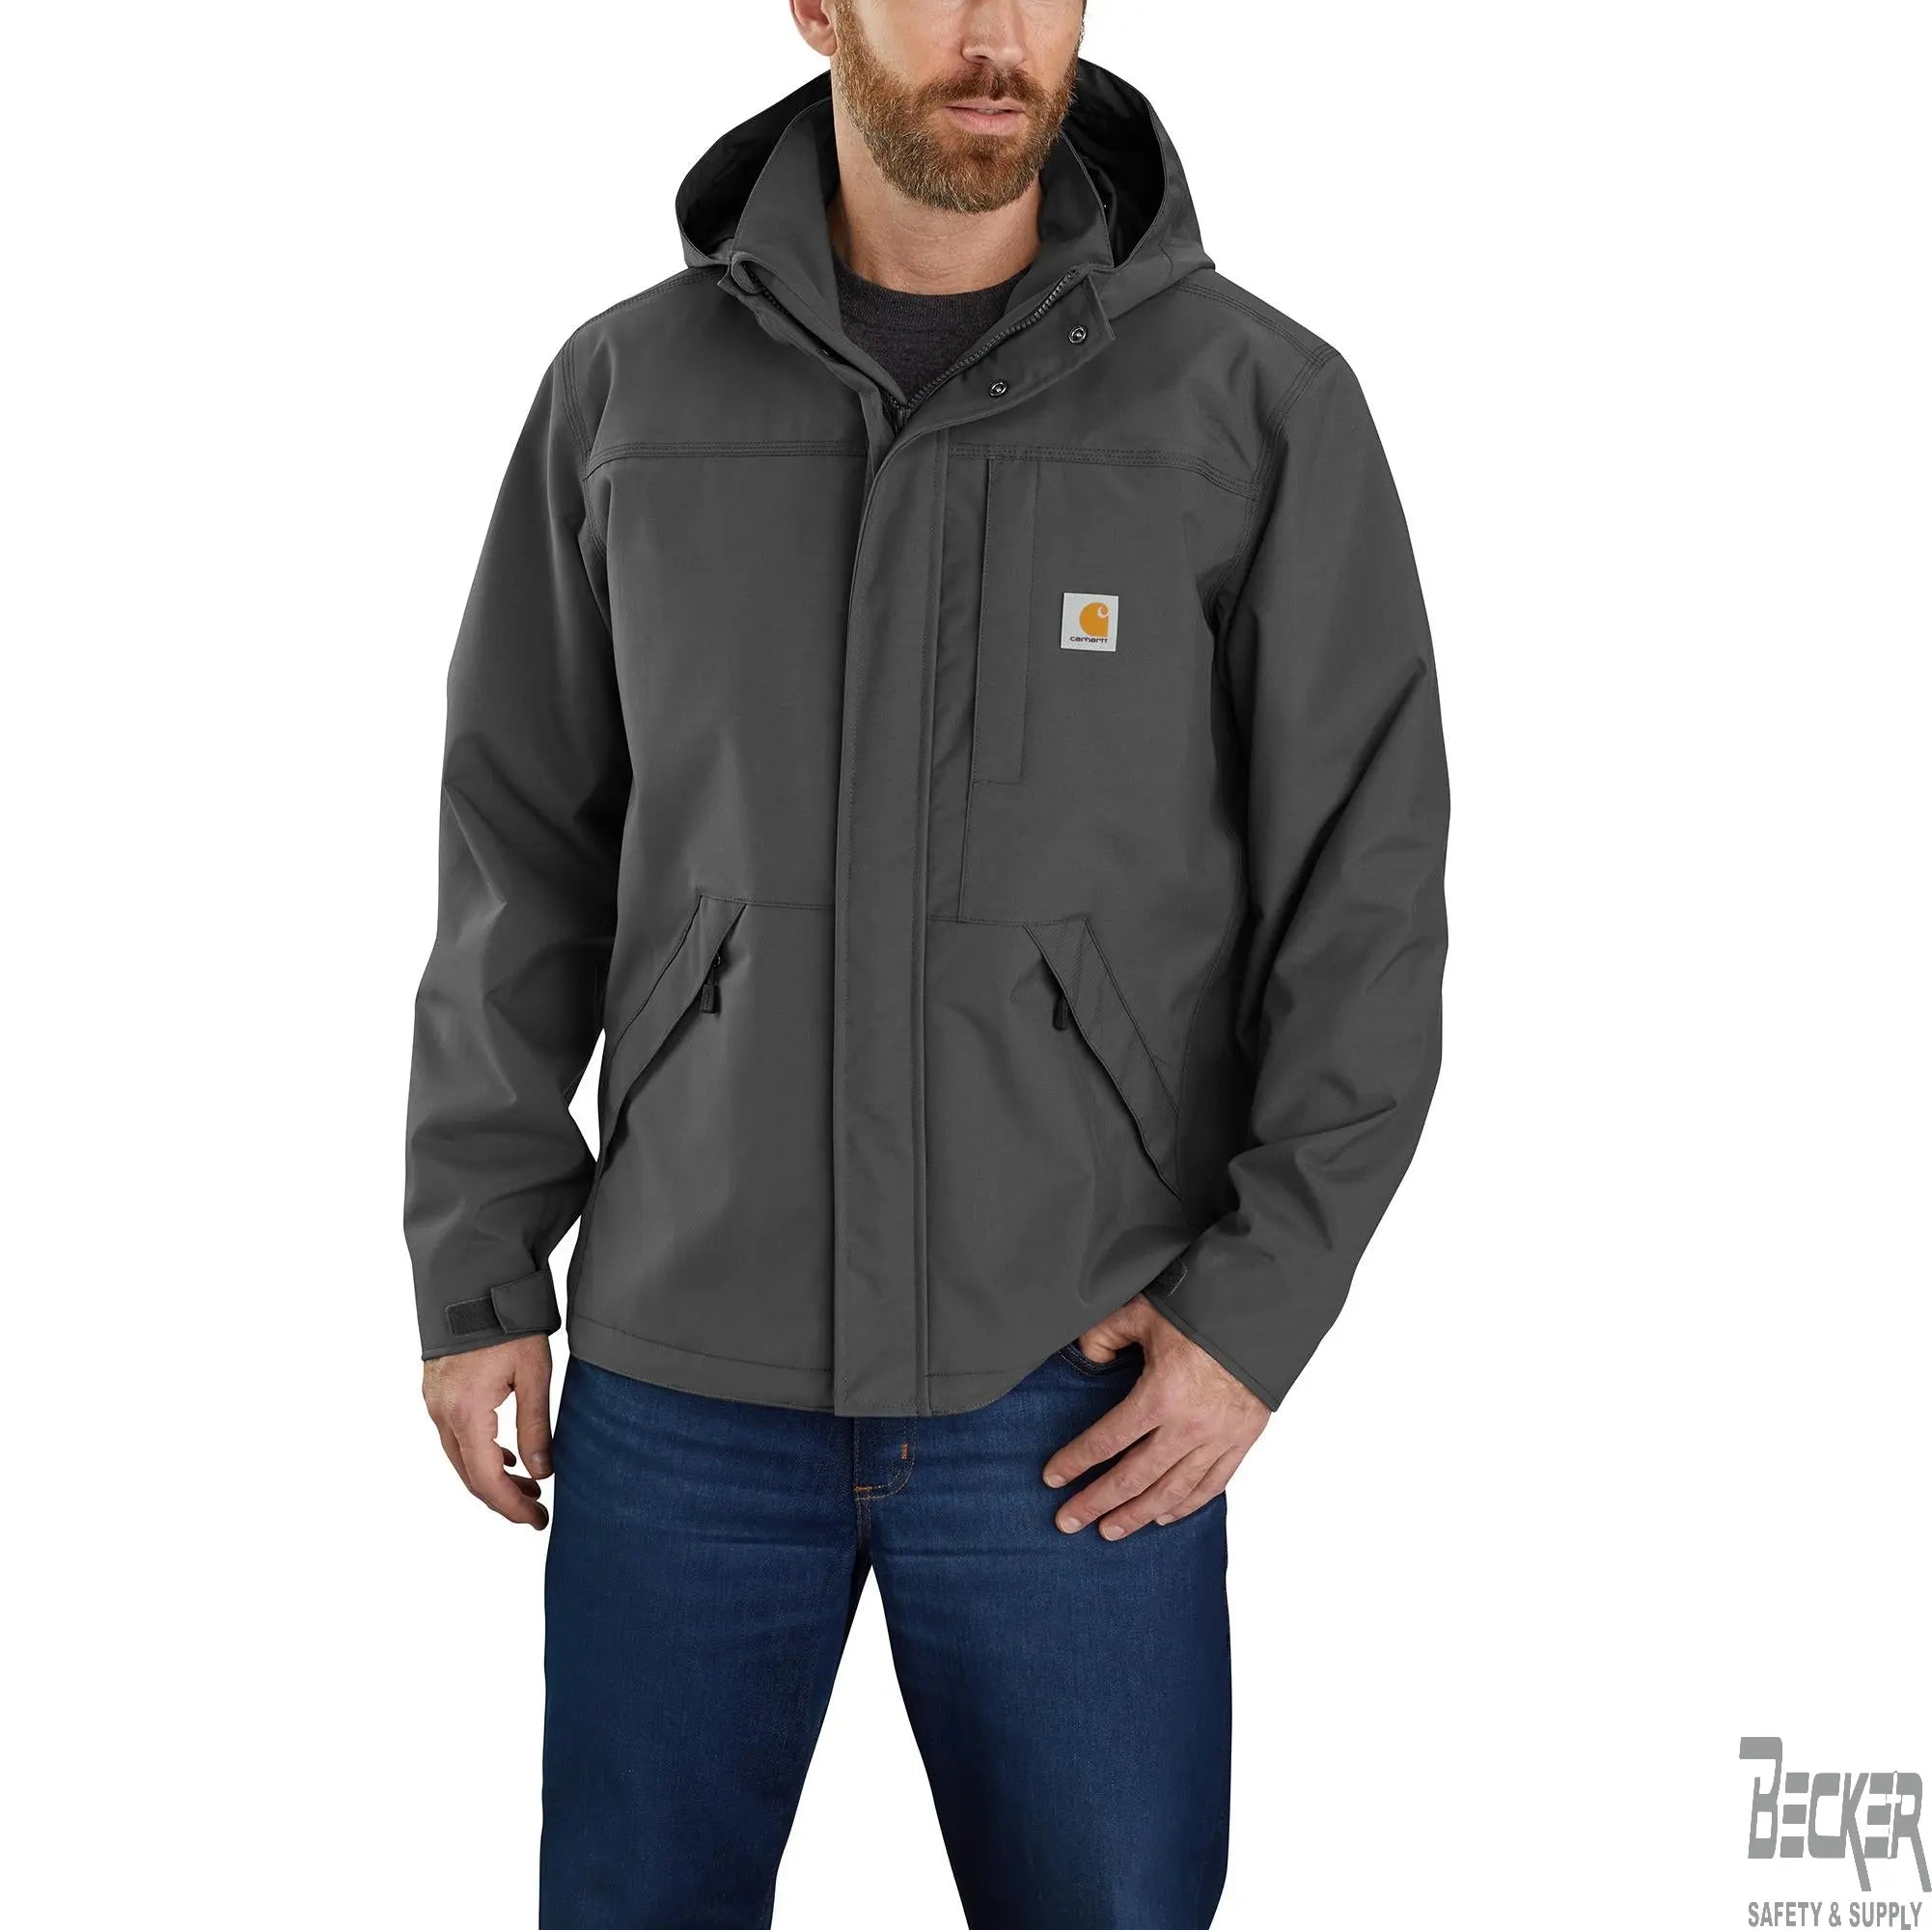 CARHARTT - Storm Defender Loose Fit Heavyweight Jacket - Becker Safety and Supply